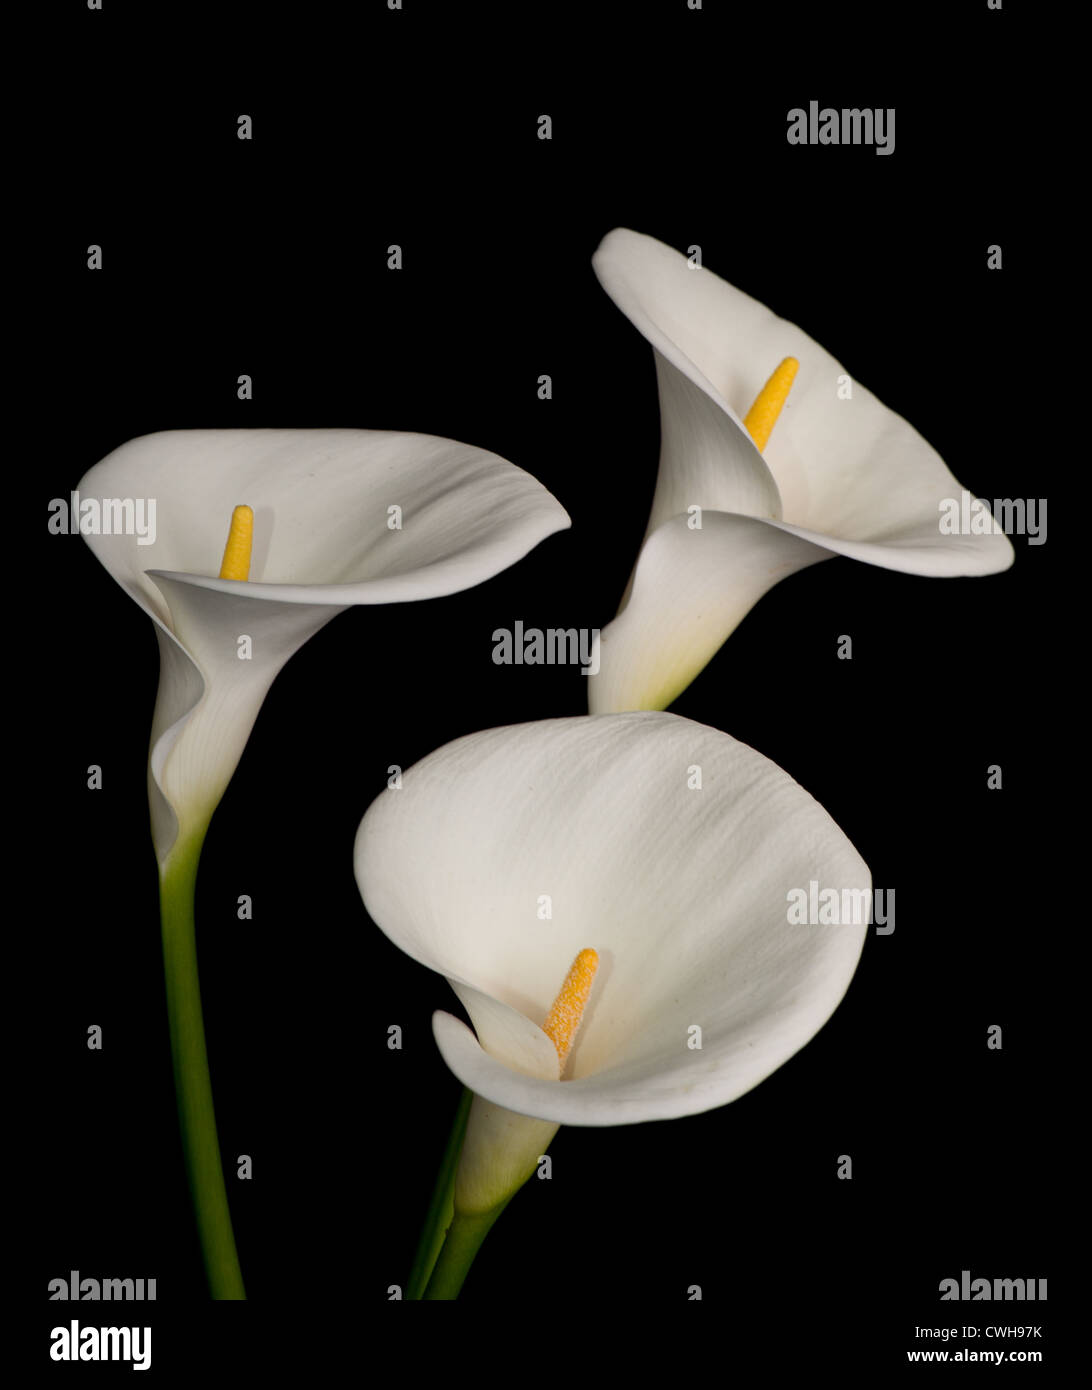 Three white calla lilies isolated on black background Stock Photo